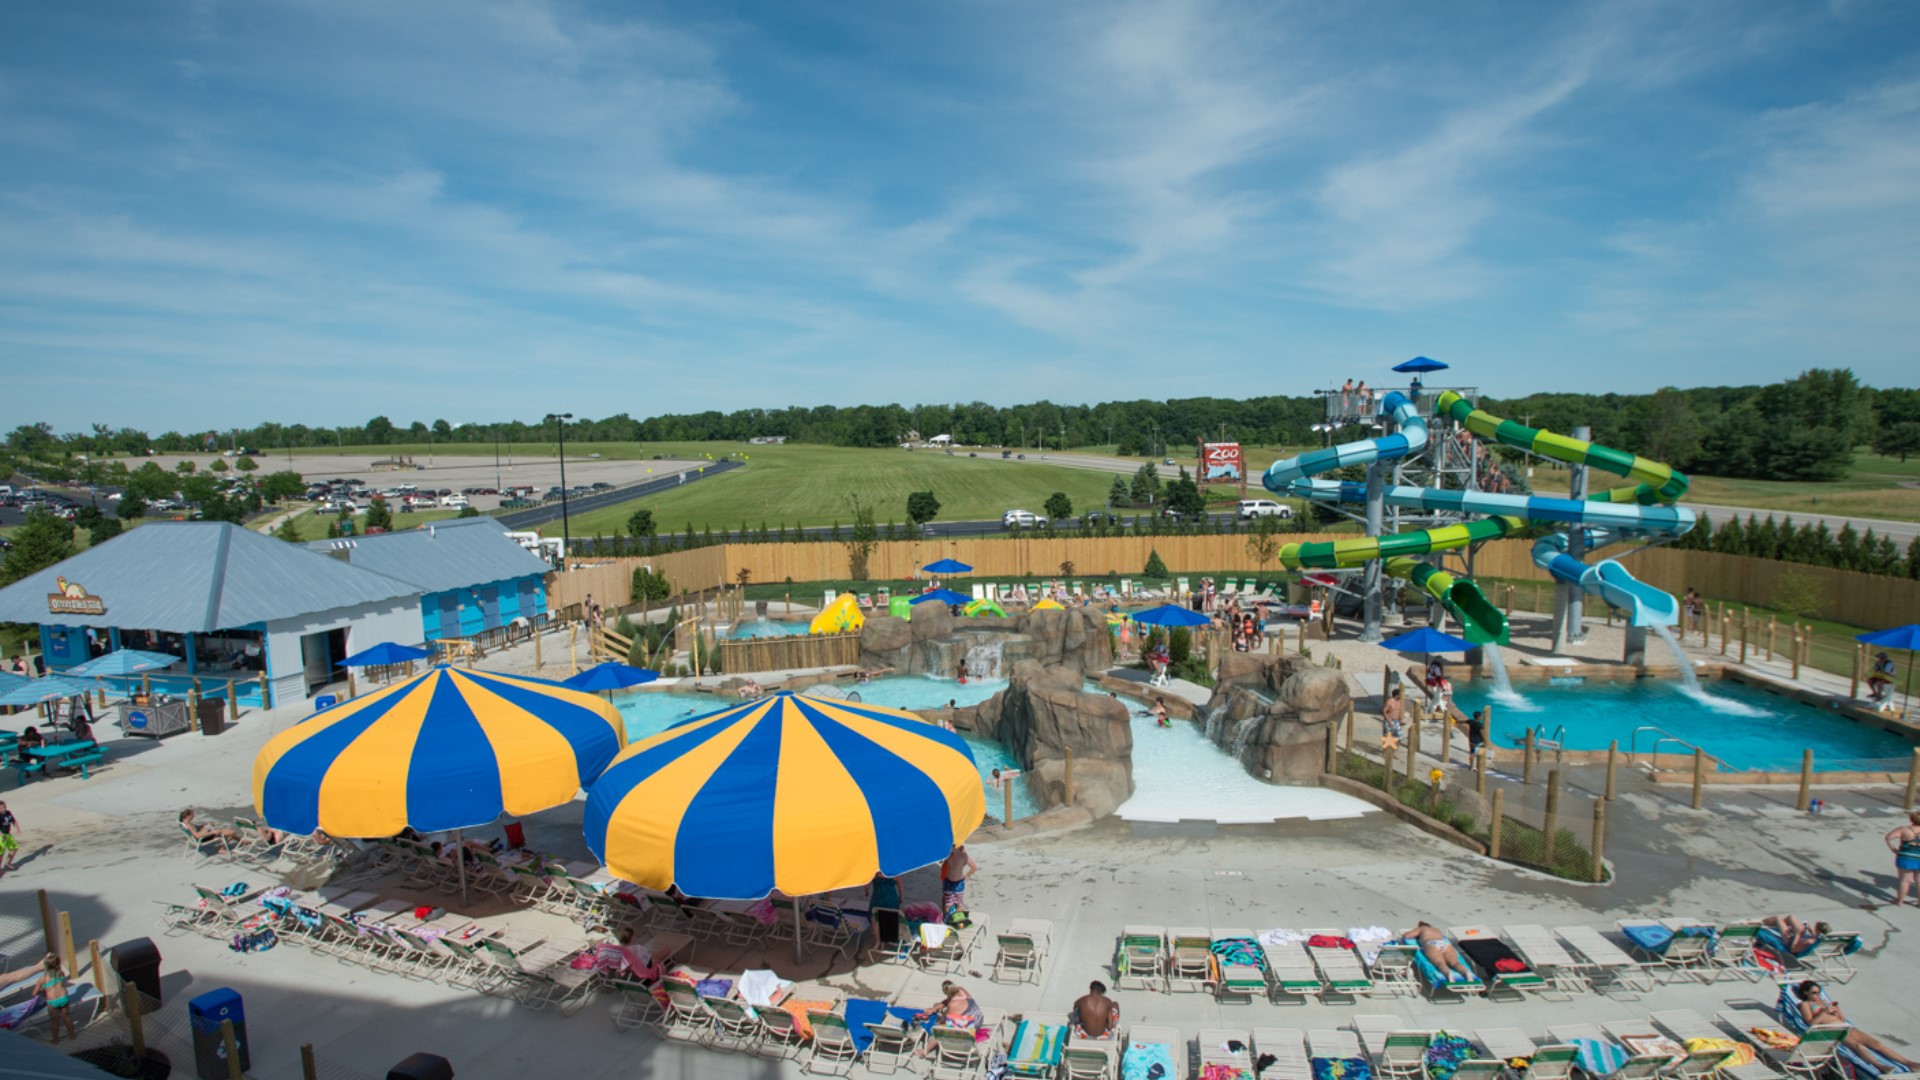 On May 20 and 21, the water park will be open for all guests and season pass holders from 10:30 a.m. to 6 p.m.